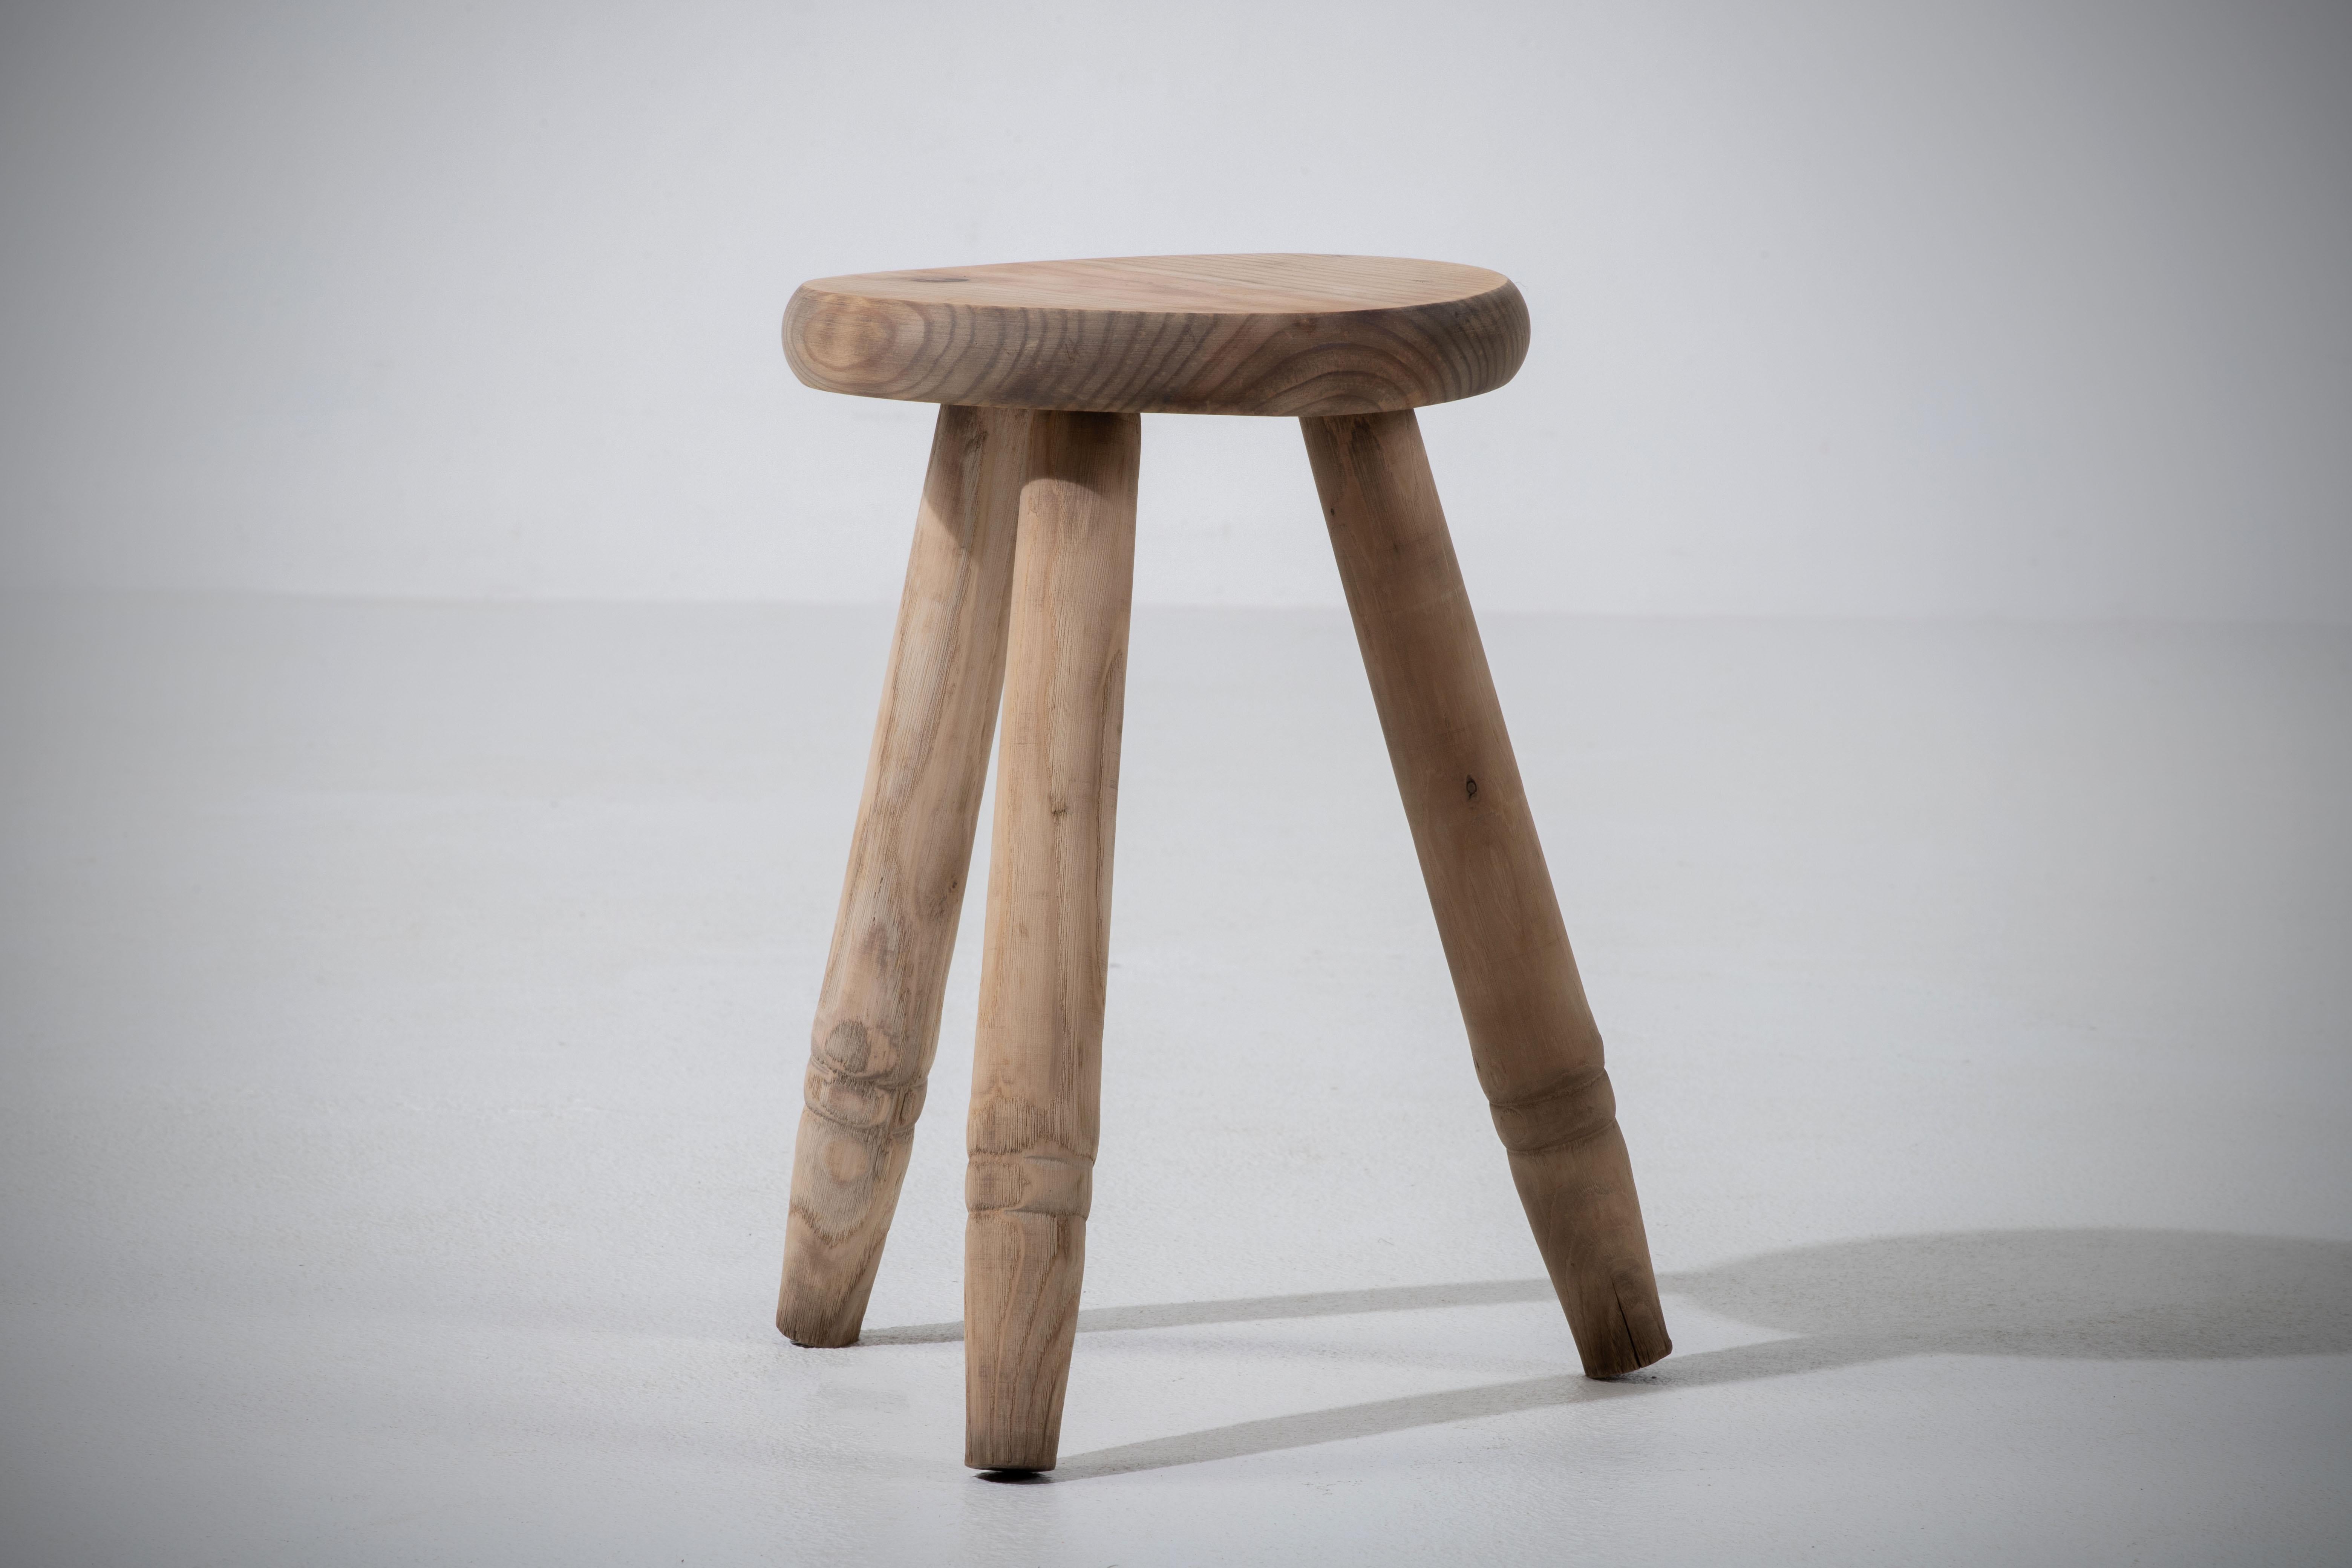 Midcentury Pine Stool with Tapered Legs, 1960s, France For Sale 1